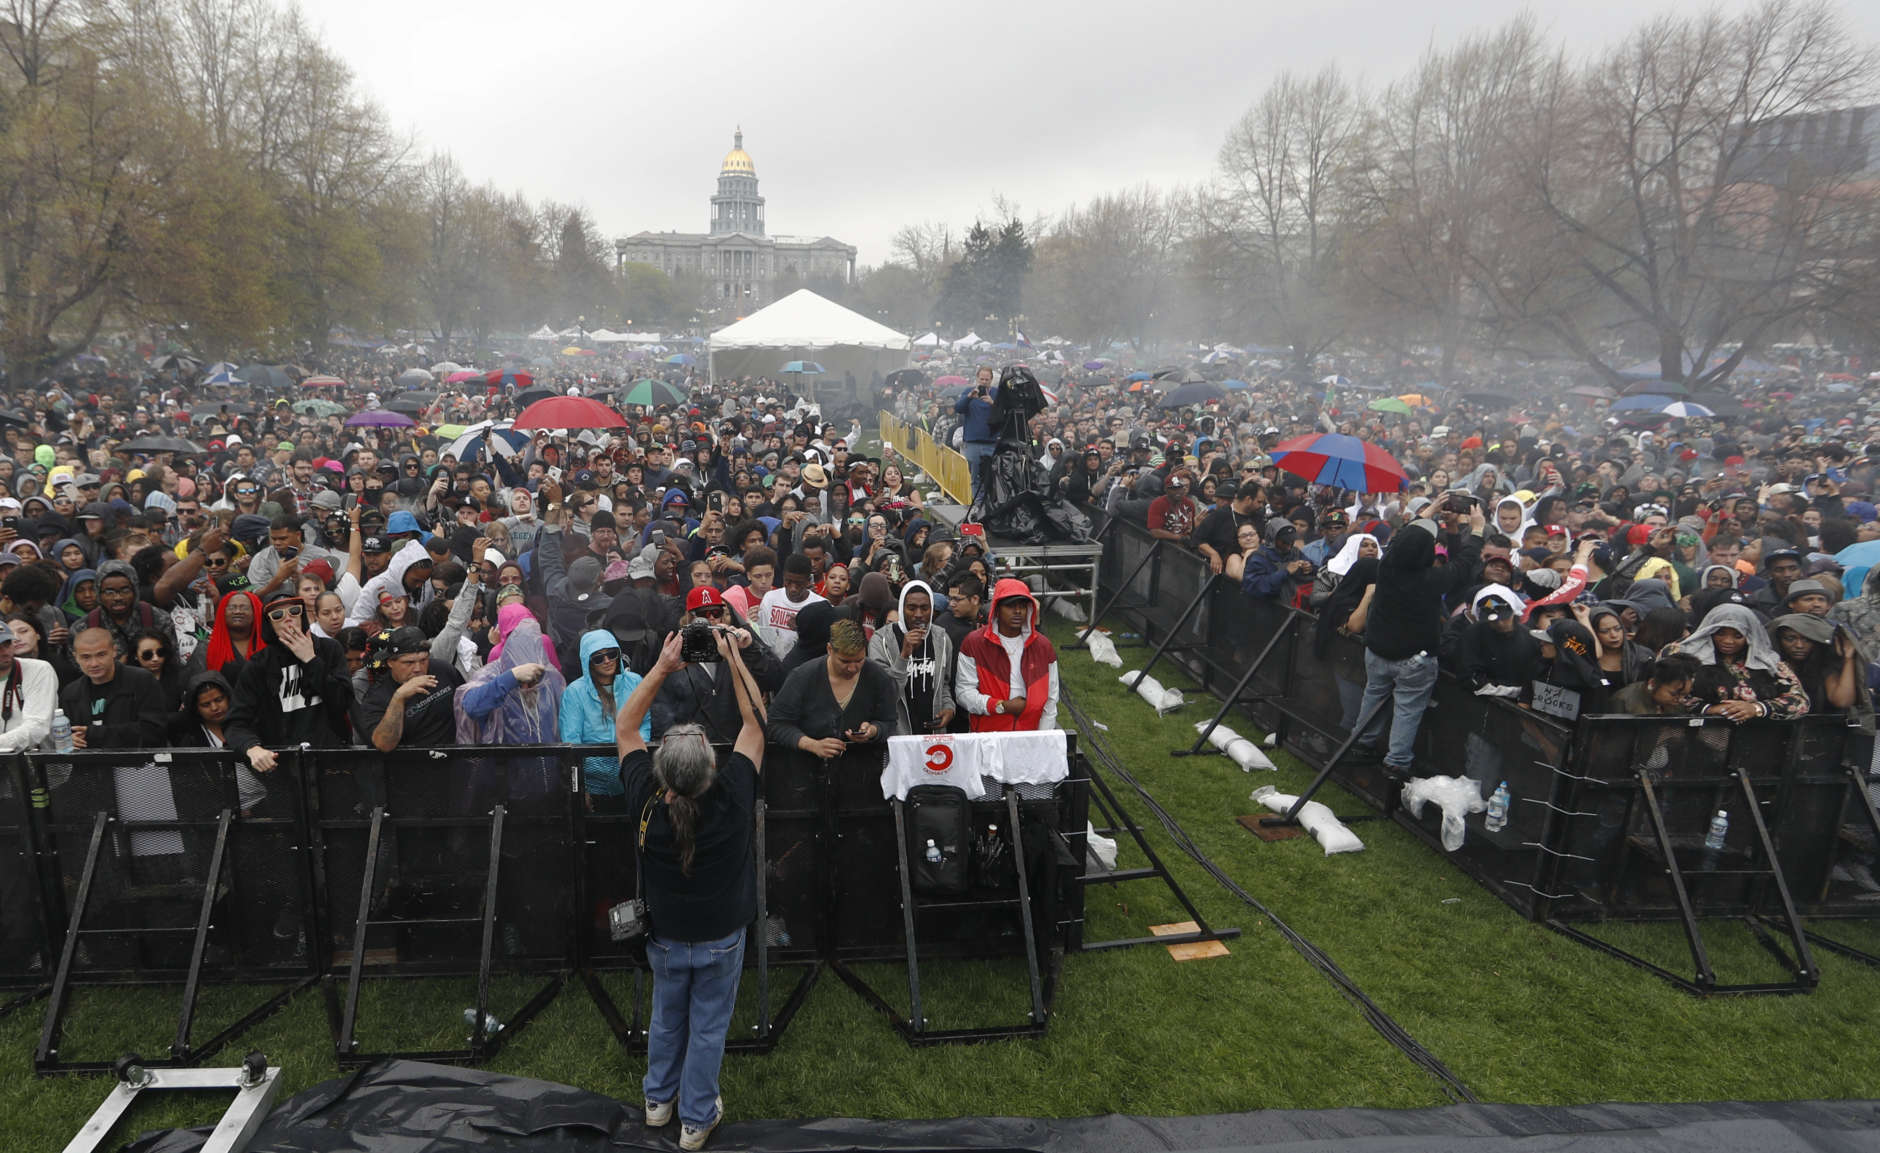 FILE -- Marijuana enthusiasts light up at 4:20 p.m. MDT to mark the 4/20 holiday on Thursday, April 20, 2017, in Denver's Civic Center Park. The annual celebration of cannabis culture attracted users from across the intermountain West to Denver. (AP Photo/David Zalubowski)